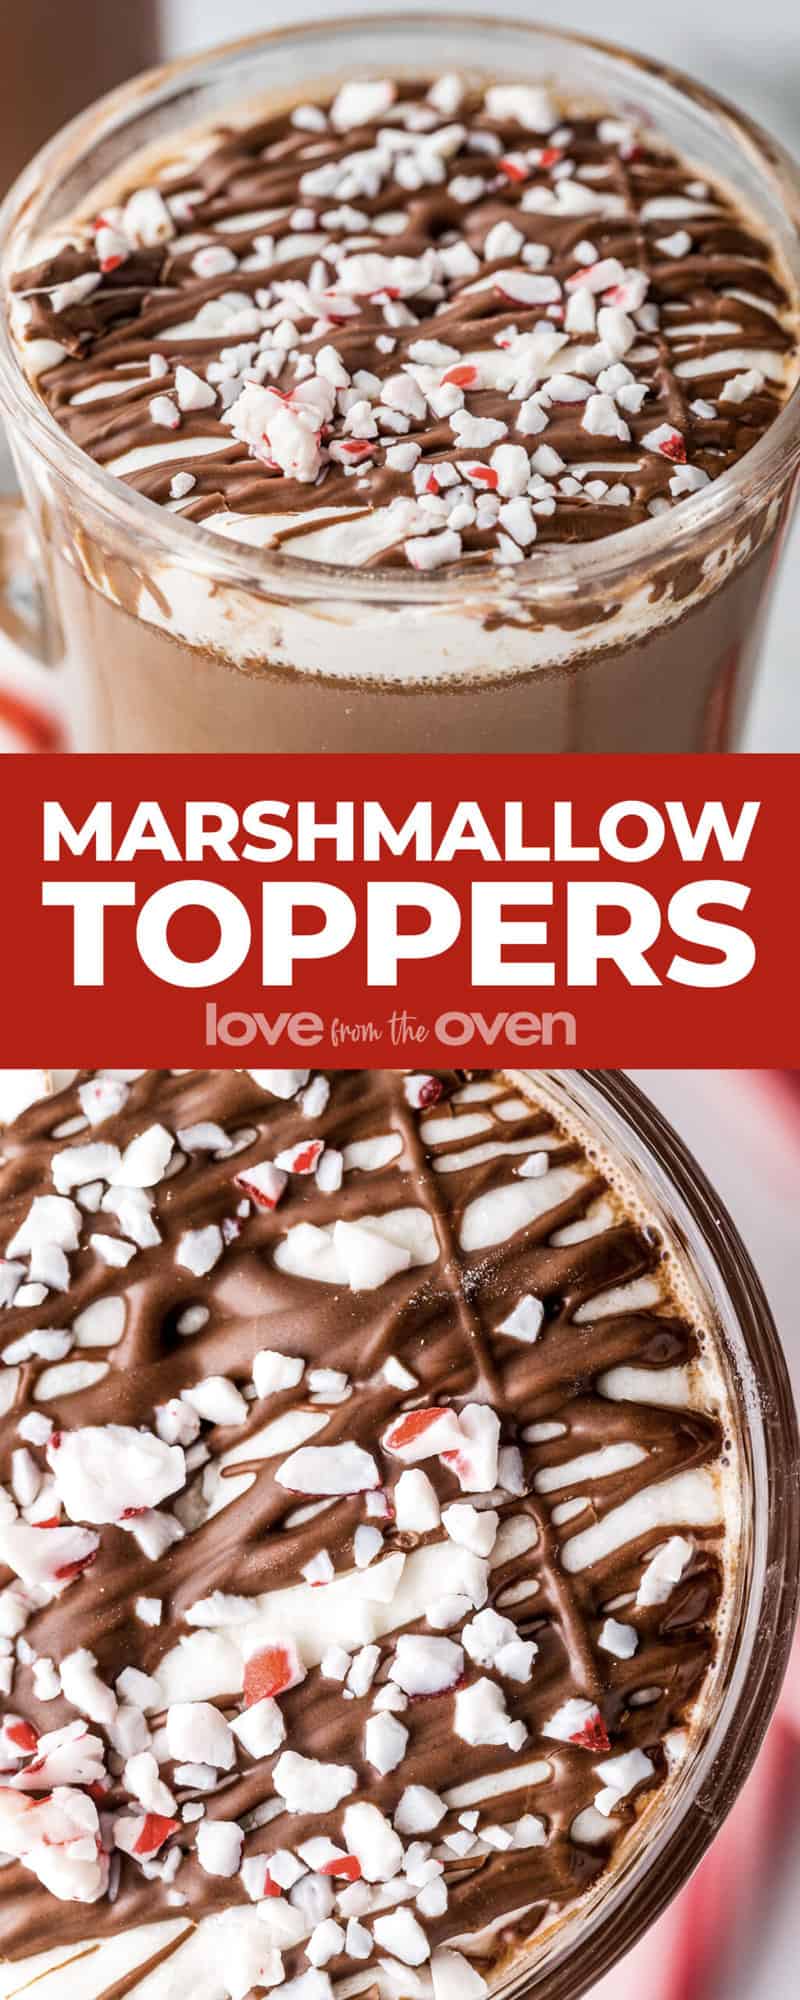 https://www.lovefromtheoven.com/wp-content/uploads/2022/11/easy-hot-cocoa-marshmallow-toppers-scaled.jpg